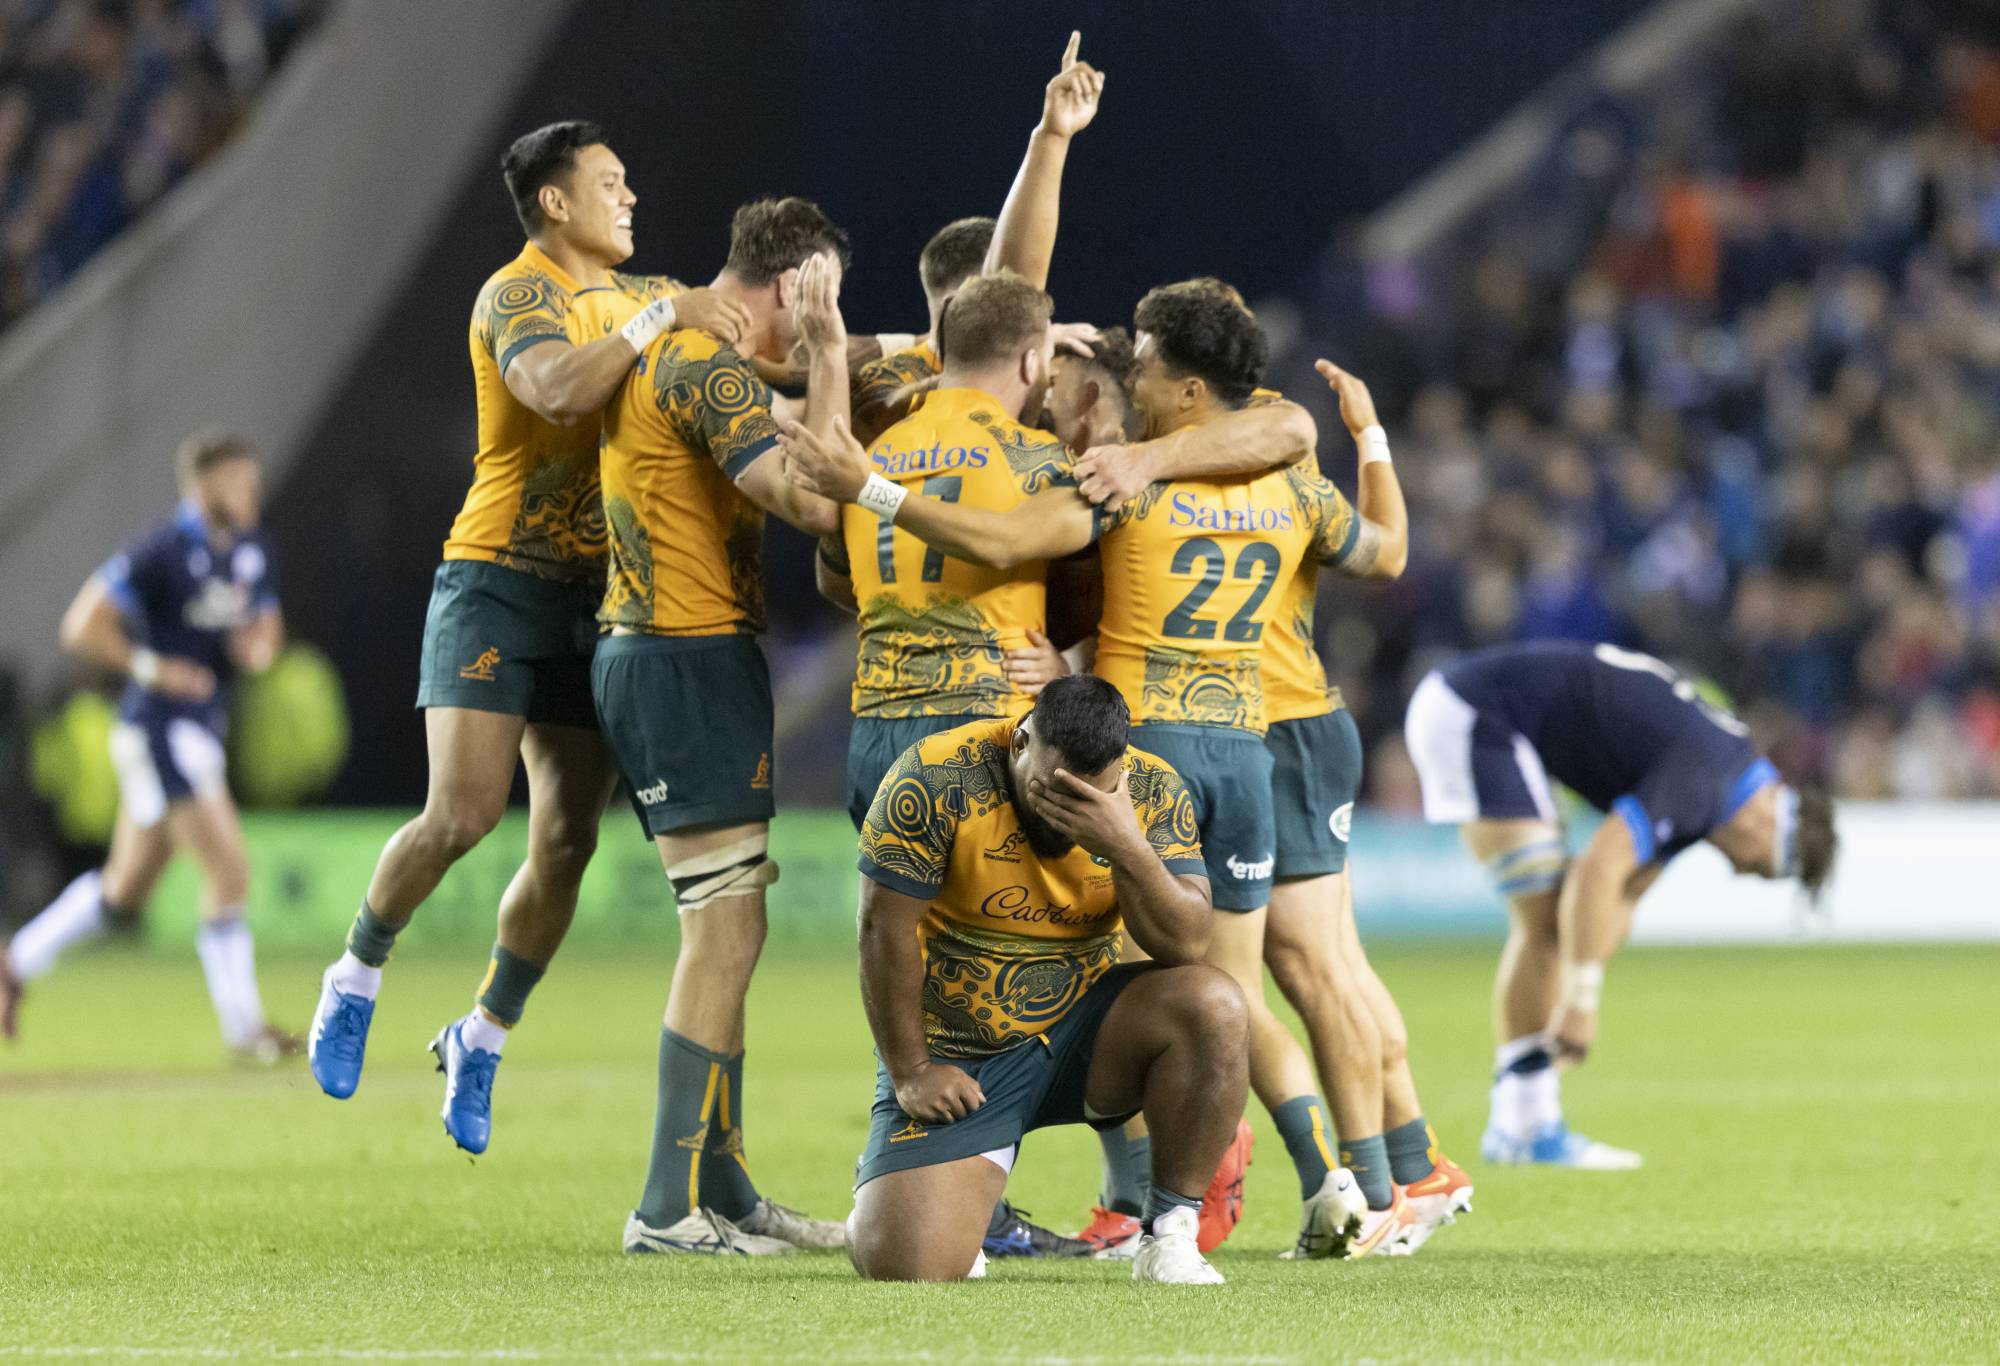 Australia's Taniela Tupou (centre kneeling) reacts as his team celebrate after winning the Autumn International match at BT Murrayfield Stadium, Edinburgh. Picture date: Saturday October 29, 2022. (Photo by Robert Perry/PA Images via Getty Images)